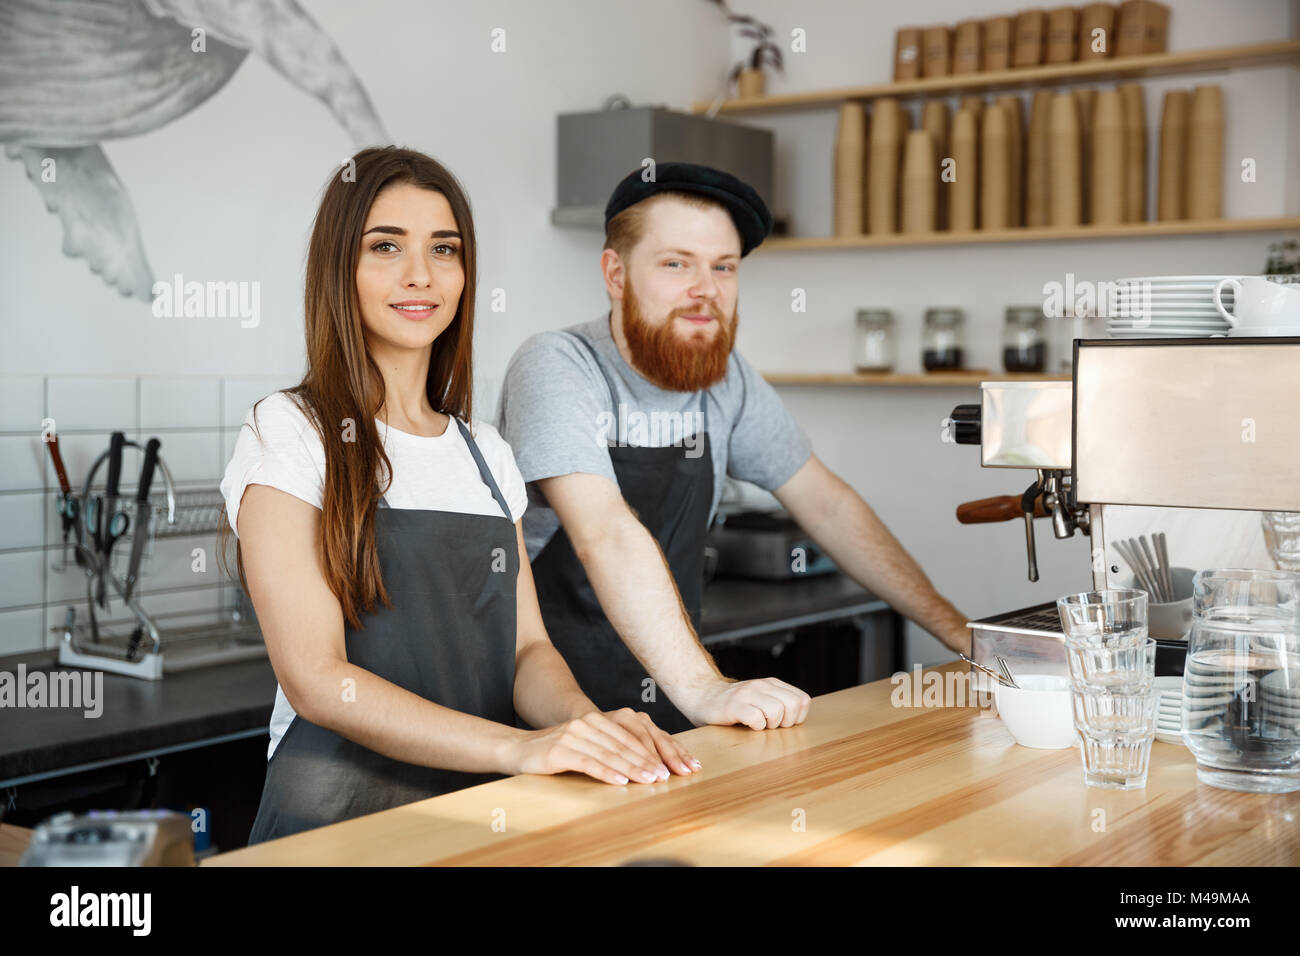 Coffee Business Concept - Positive young bearded man and beautiful attractive lady barista couple in apron looking at camera while standing at bar Counter. Stock Photo